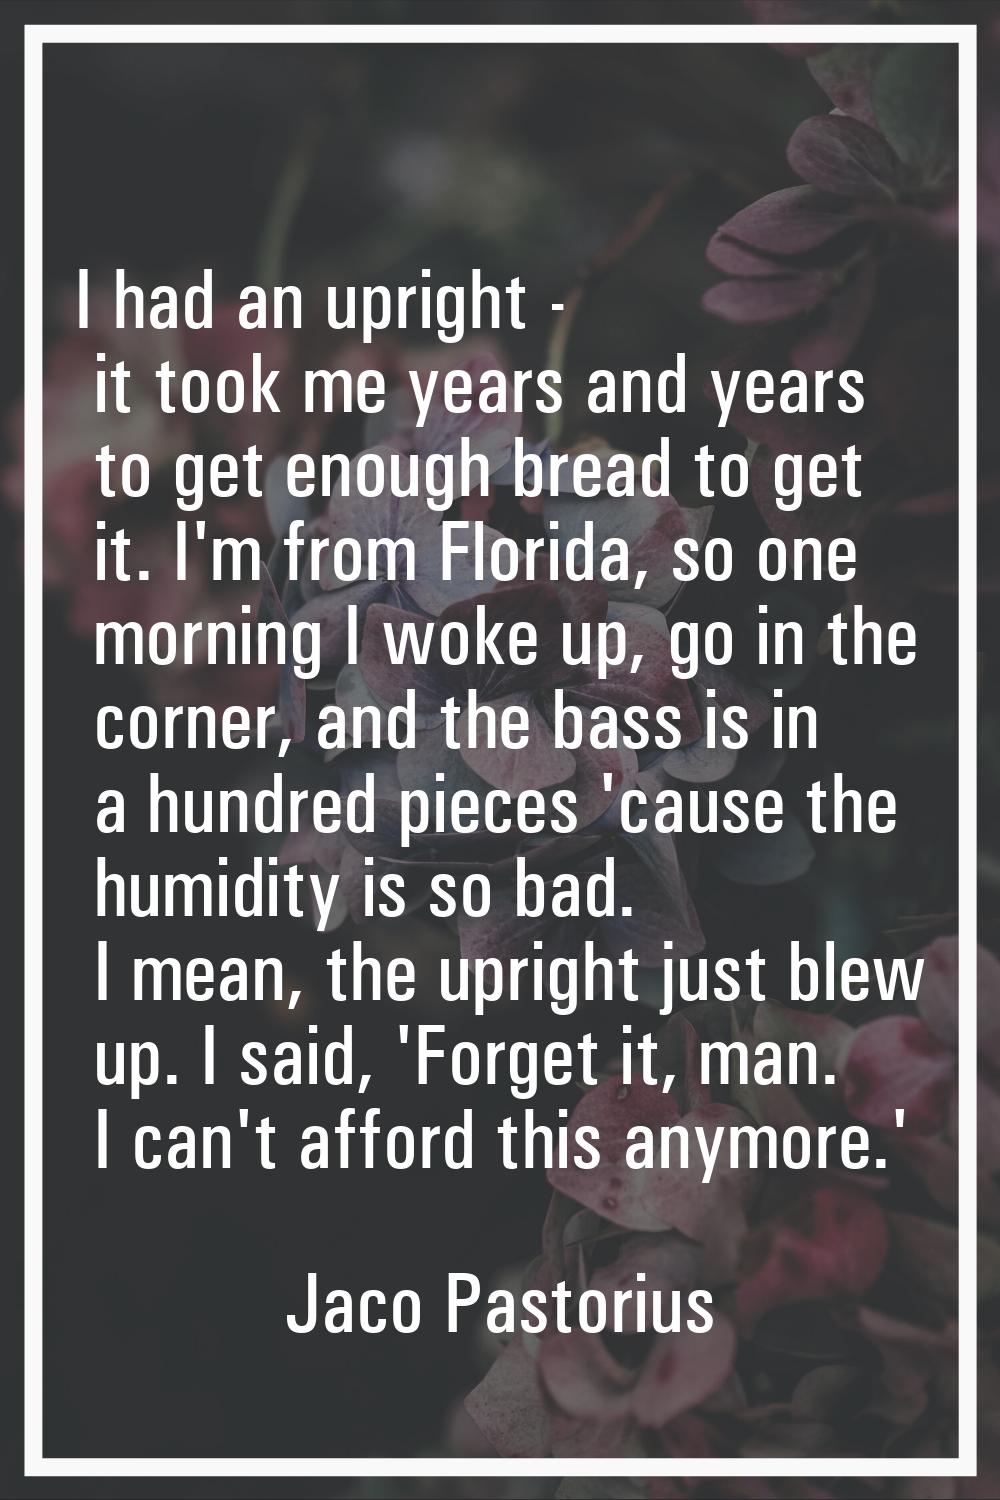 I had an upright - it took me years and years to get enough bread to get it. I'm from Florida, so o